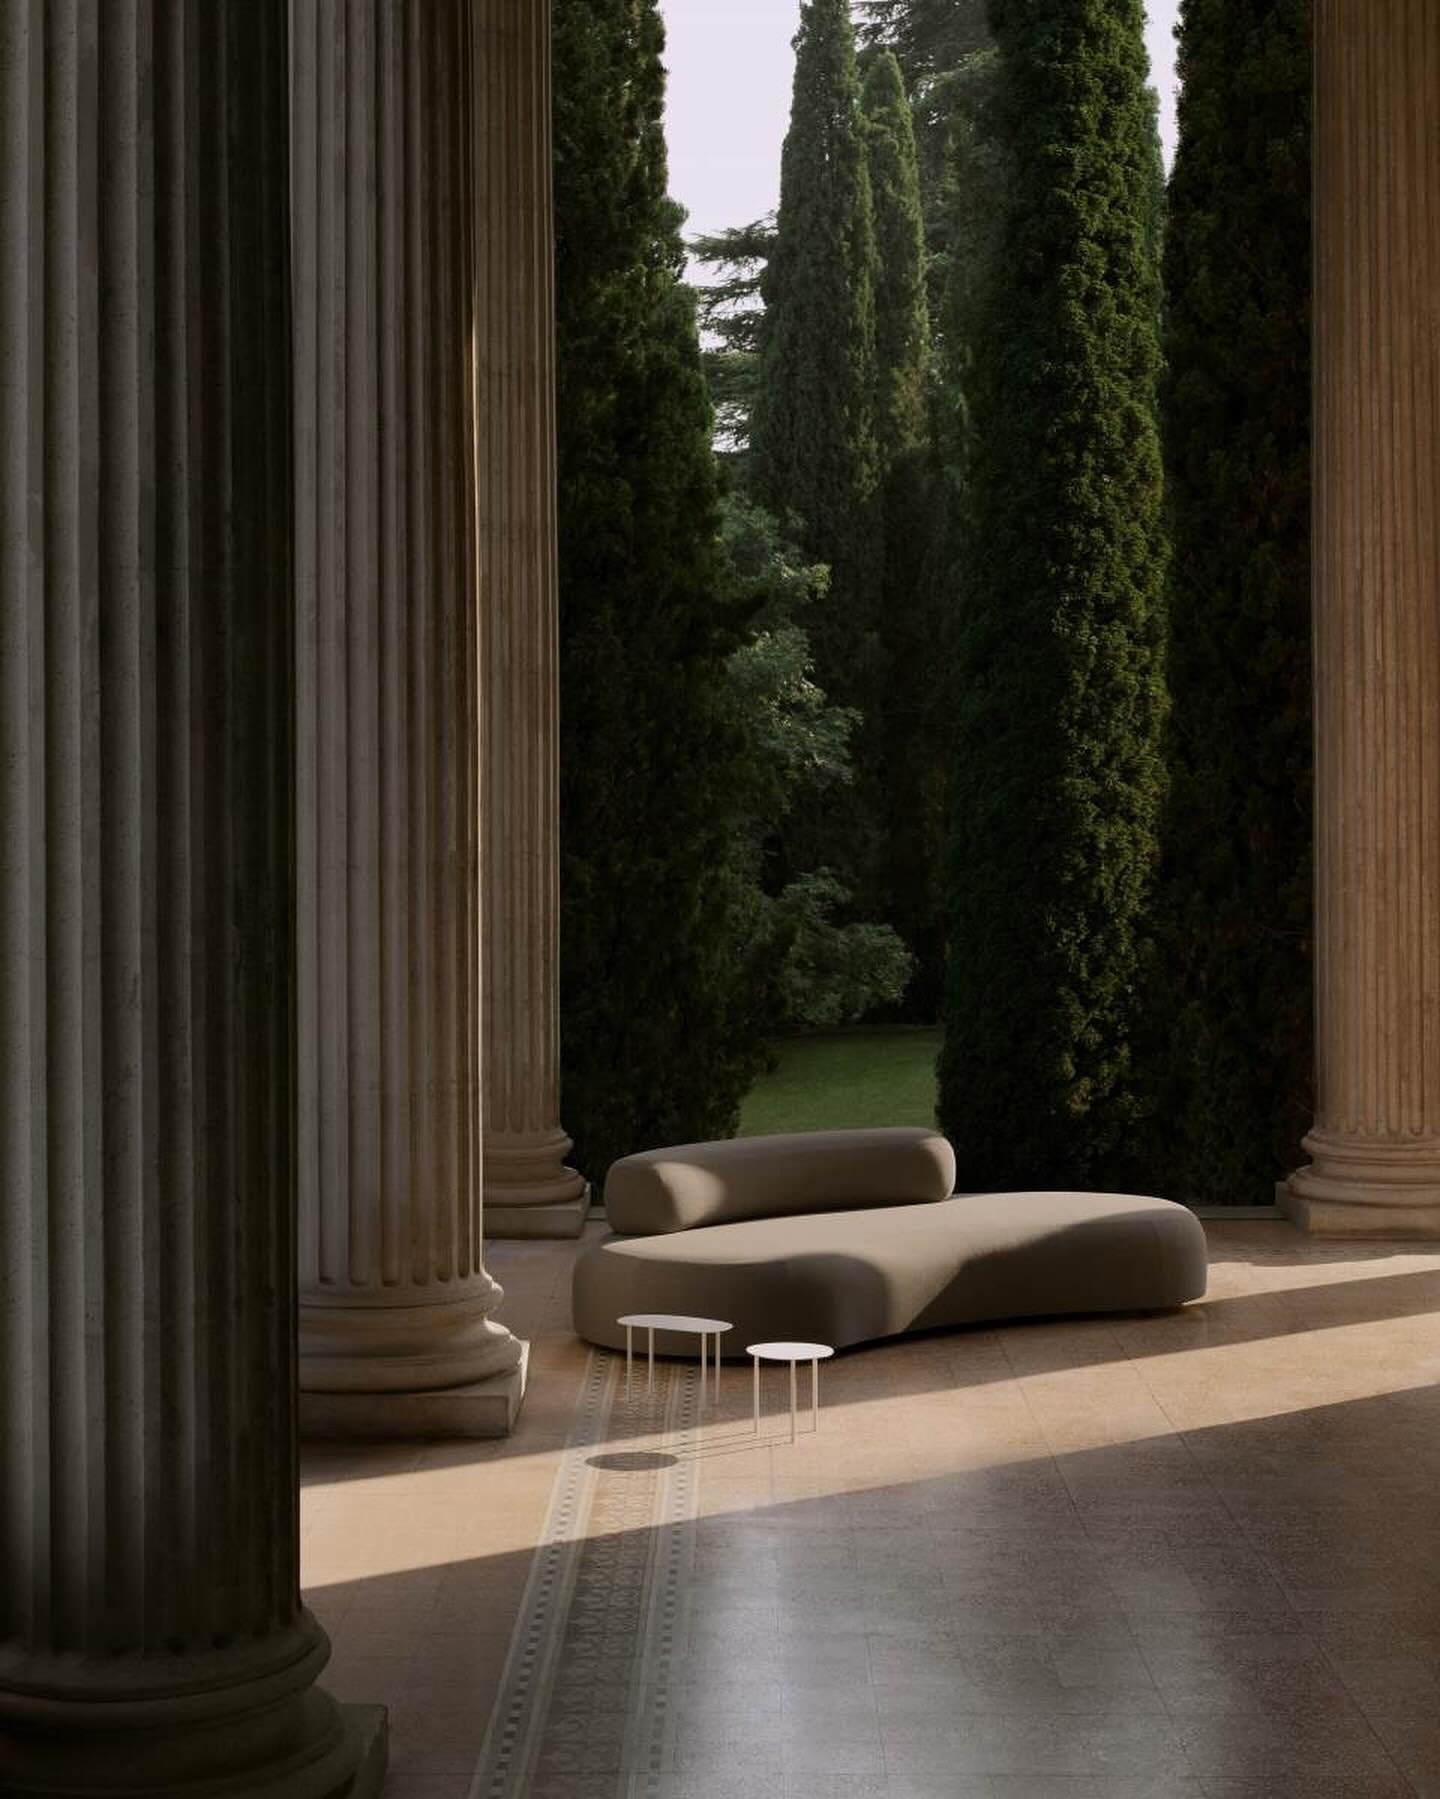 Asymmetrical and appealing sofa shapes designed by Piero Lissoni, can be customized with various upholstery options. Also available in outdoor sofa version @ GRAYE. 

&bull;
&bull;
&bull;
&bull;
&bull;

#pierolissoni #livingdivani #sofa #curvedsofa #